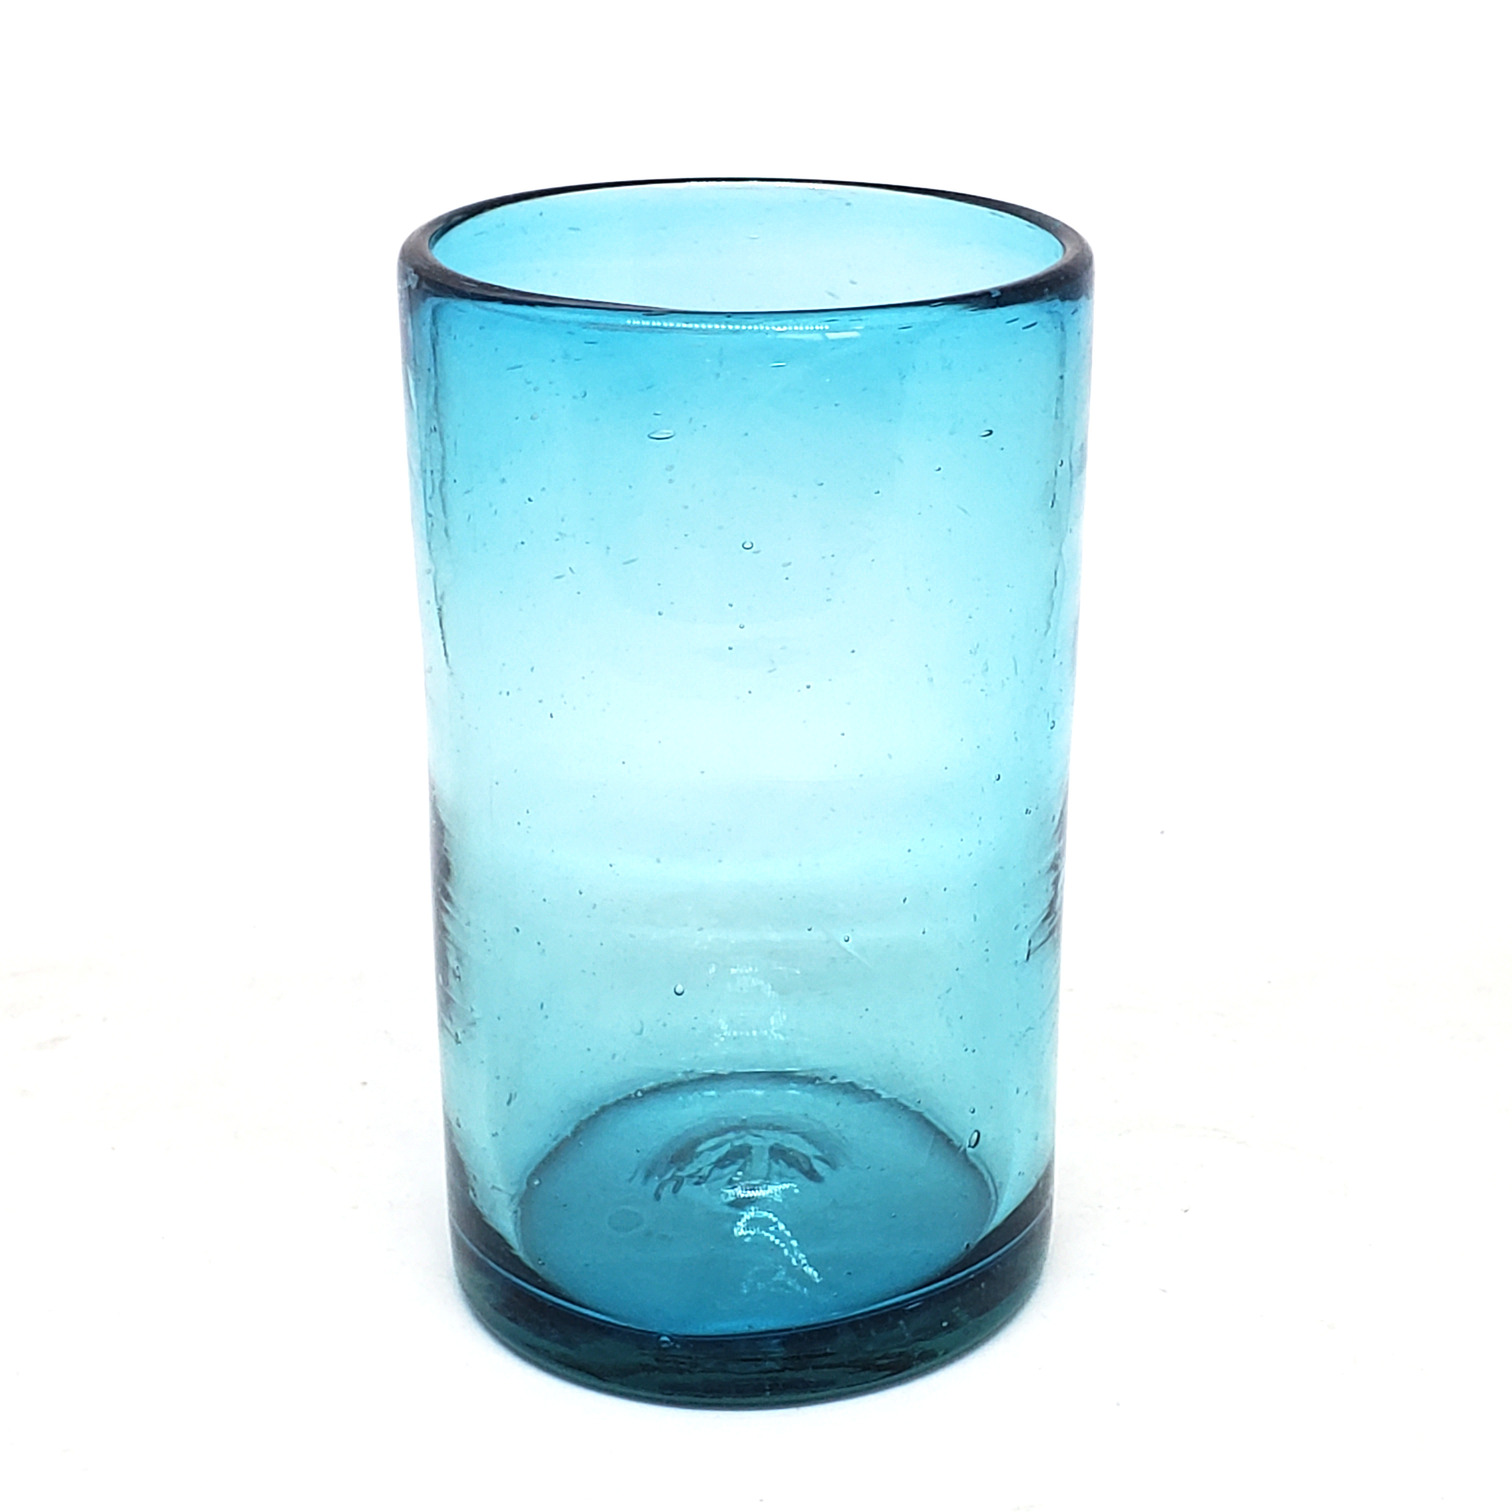 Wholesale MEXICAN GLASSWARE / Solid Aqua Blue 14 oz Drinking Glasses  / These handcrafted glasses deliver a classic touch to your favorite drink.